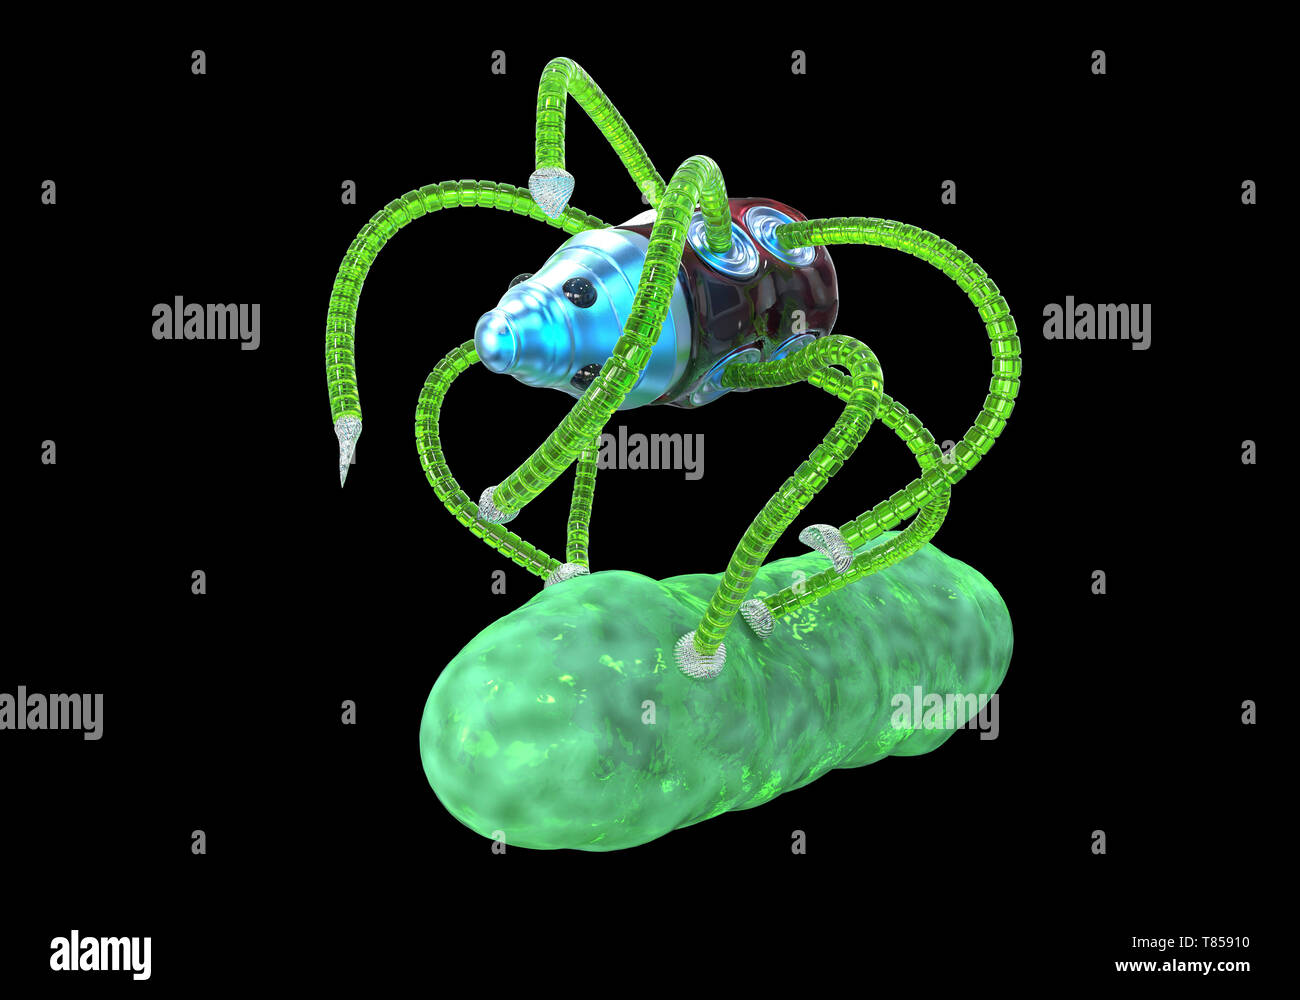 Medical nanorobot fighting with bacterium, illustration Stock Photo